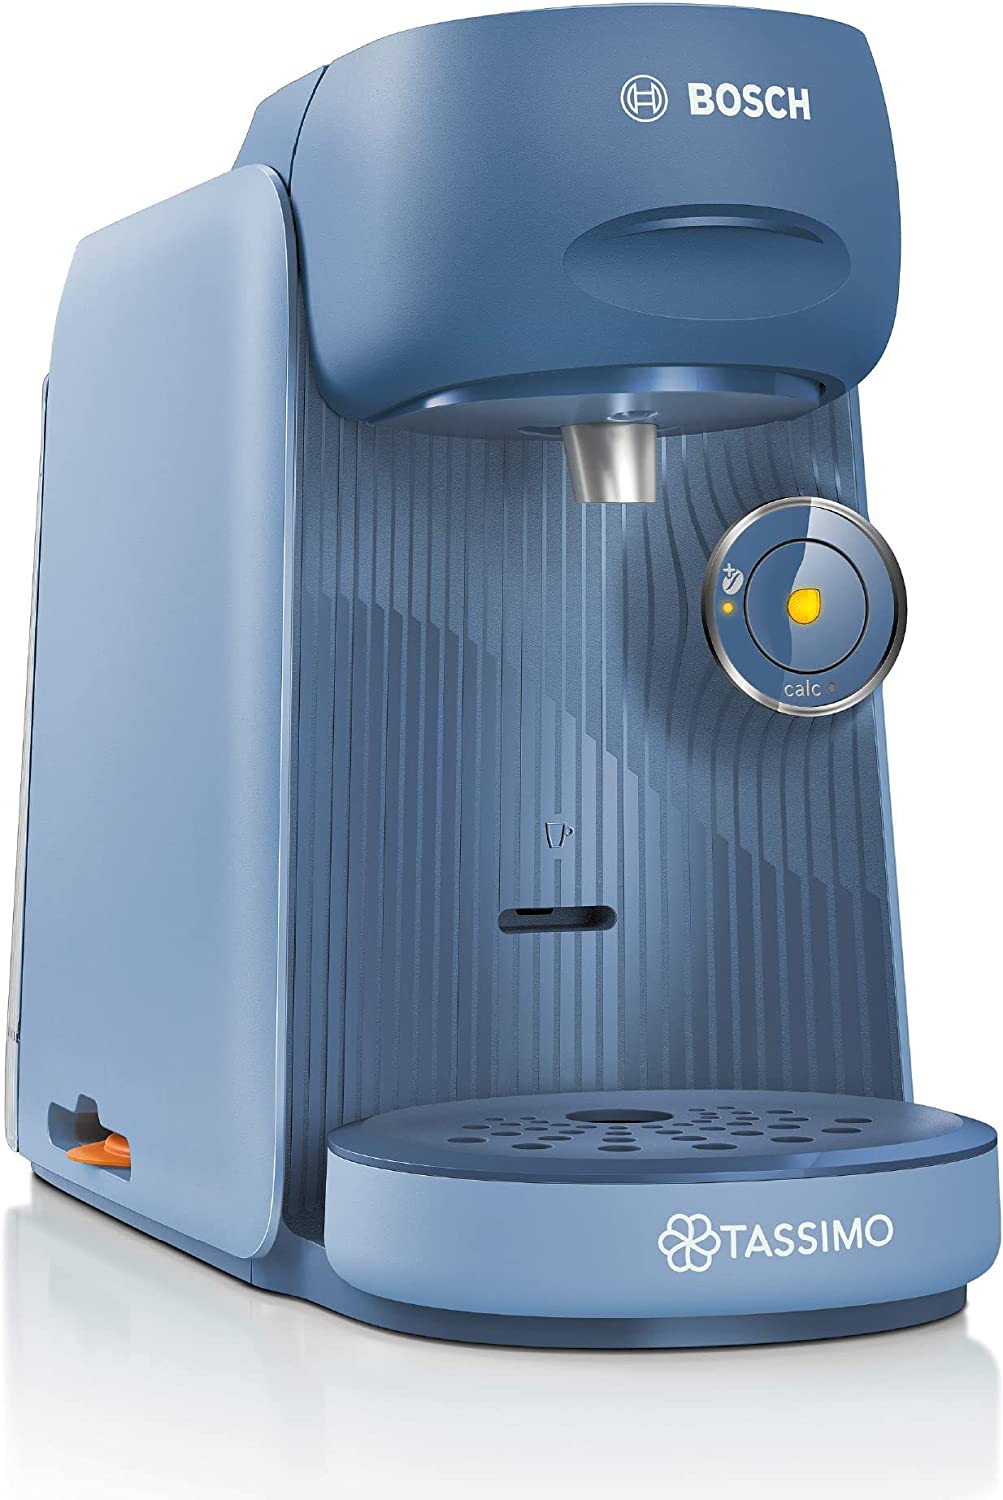 Tassimo Finesse Capsule Machine TAS16B5 Coffee Machine by Bosch, 70 Drinks, Intense Coffee at the Push, Automatic Shut-Off, Perfectly Dosed, Space-Saving, 1400 W, Blue